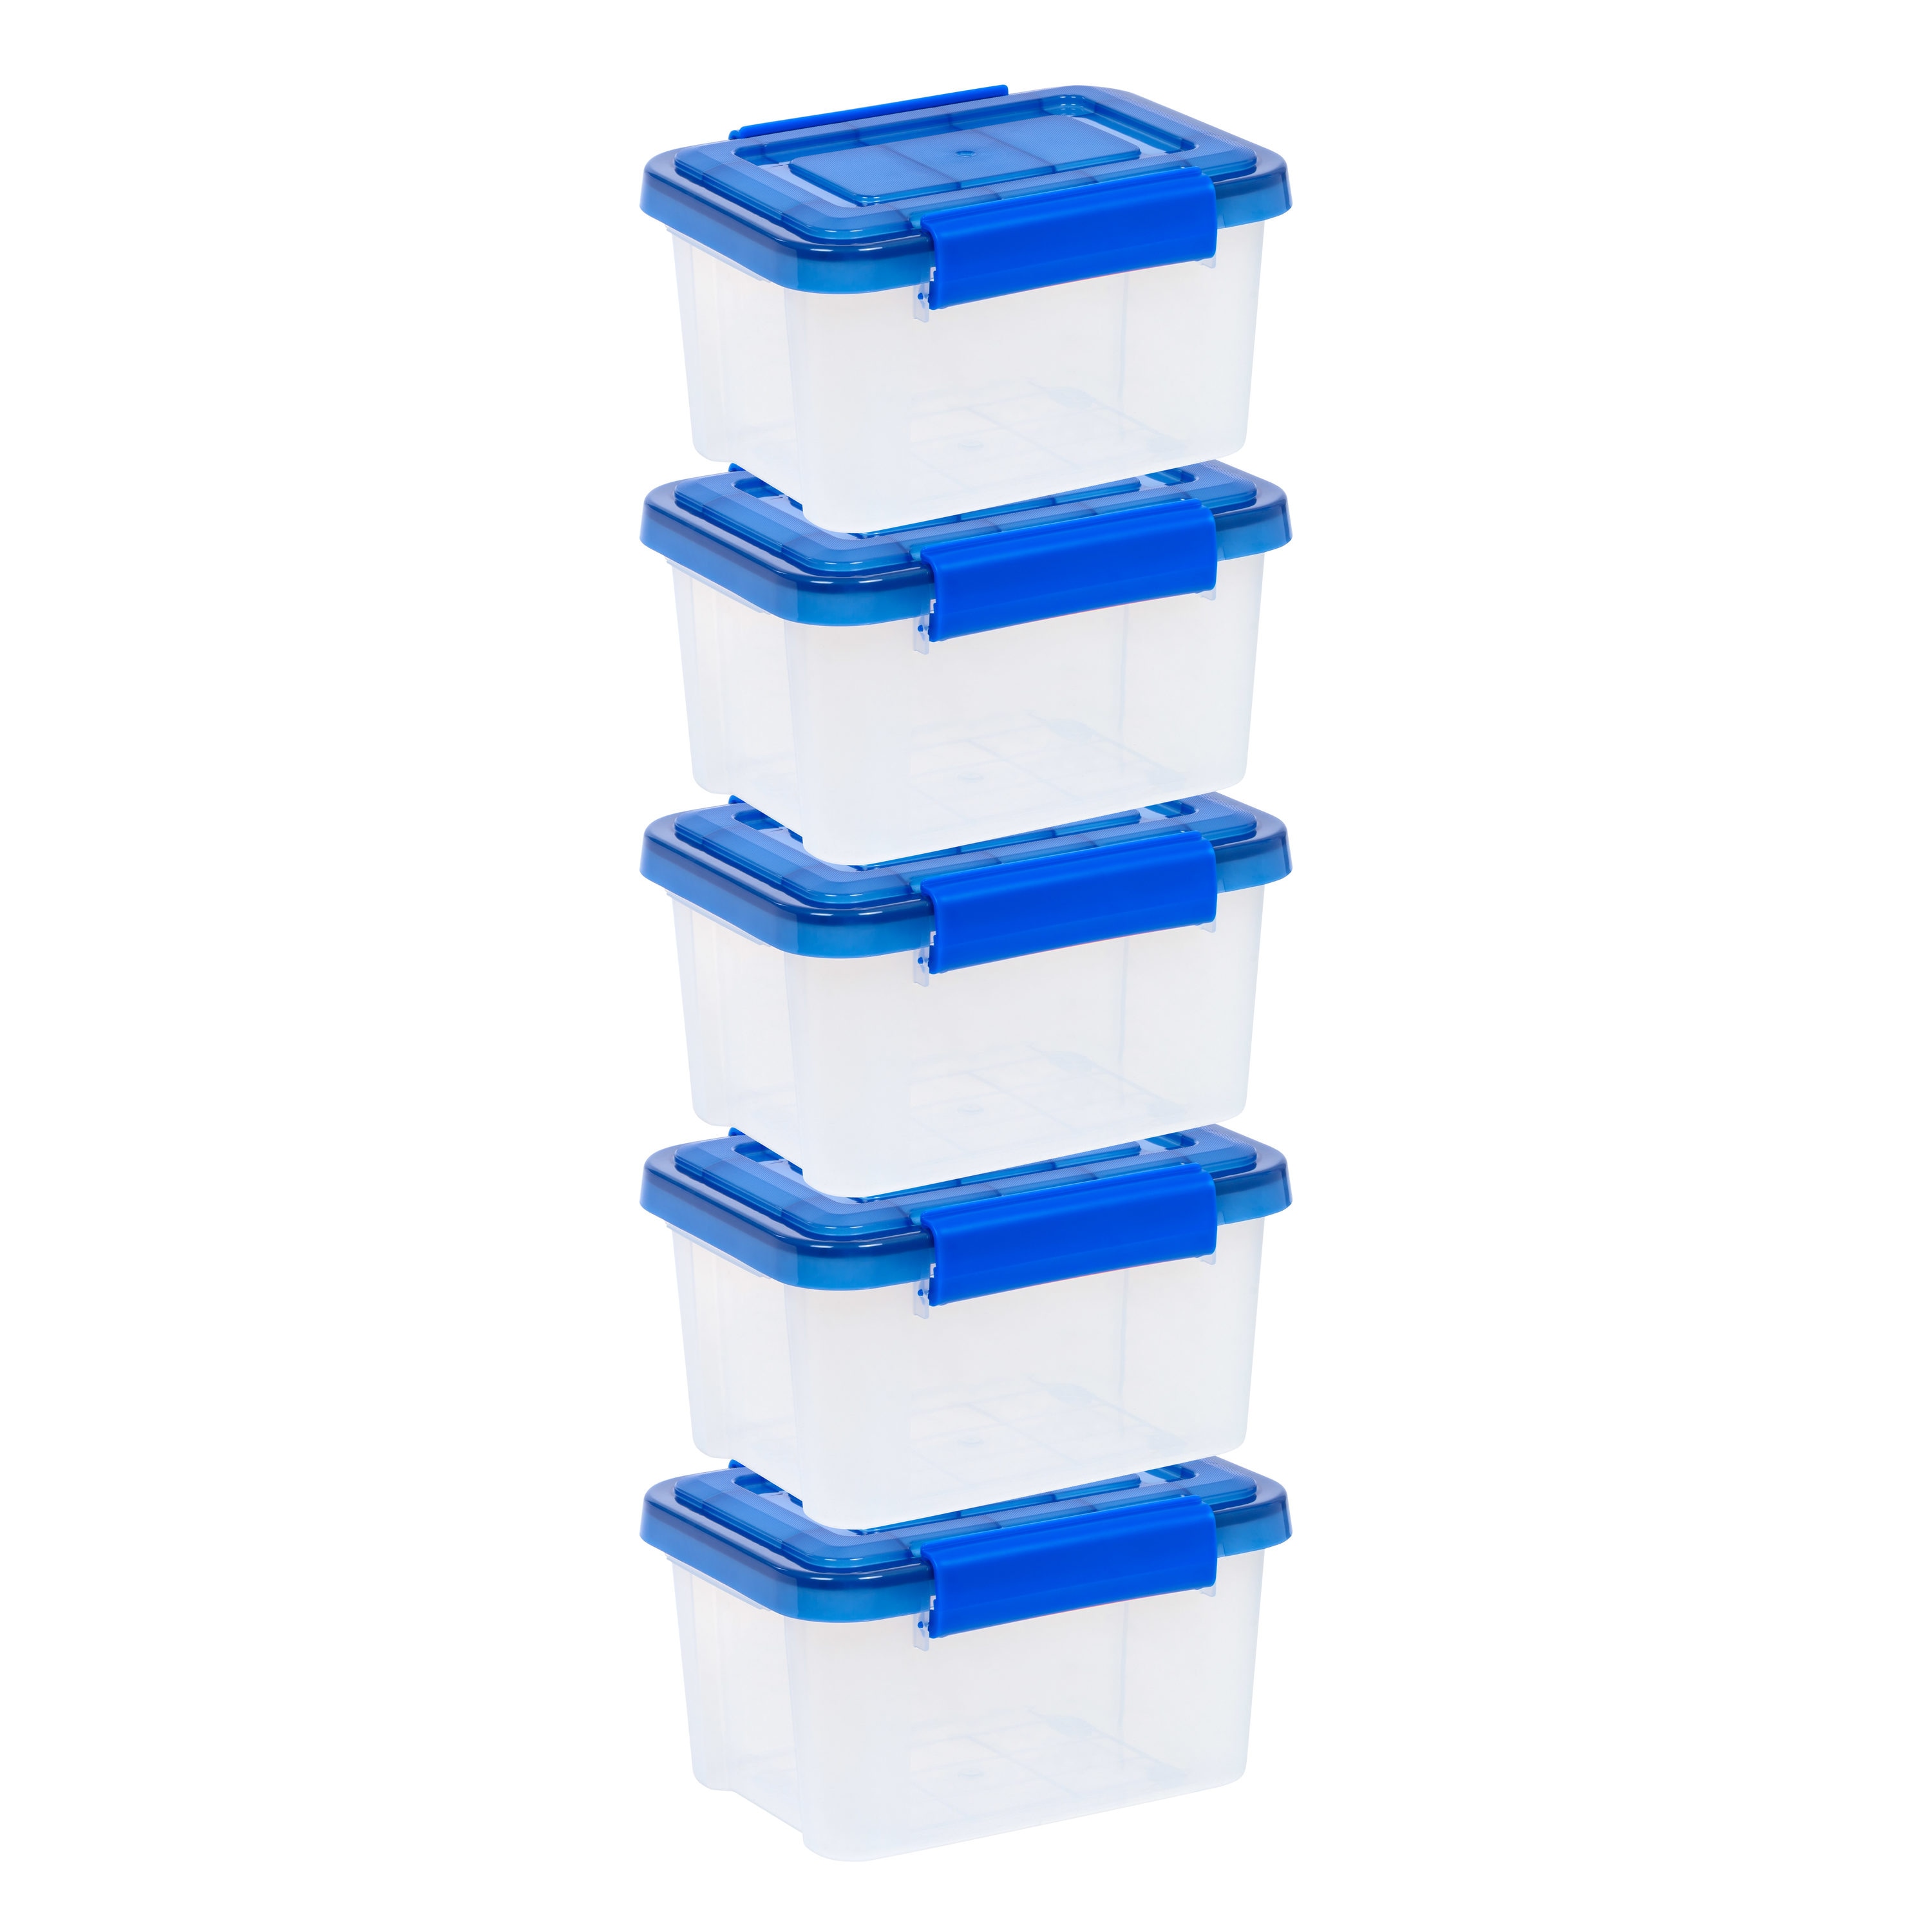 LARGE PLASTIC STORAGE BOX BOXES CONTAINERS BIN WITH LID 5L 14L 32L 52L CRATE 